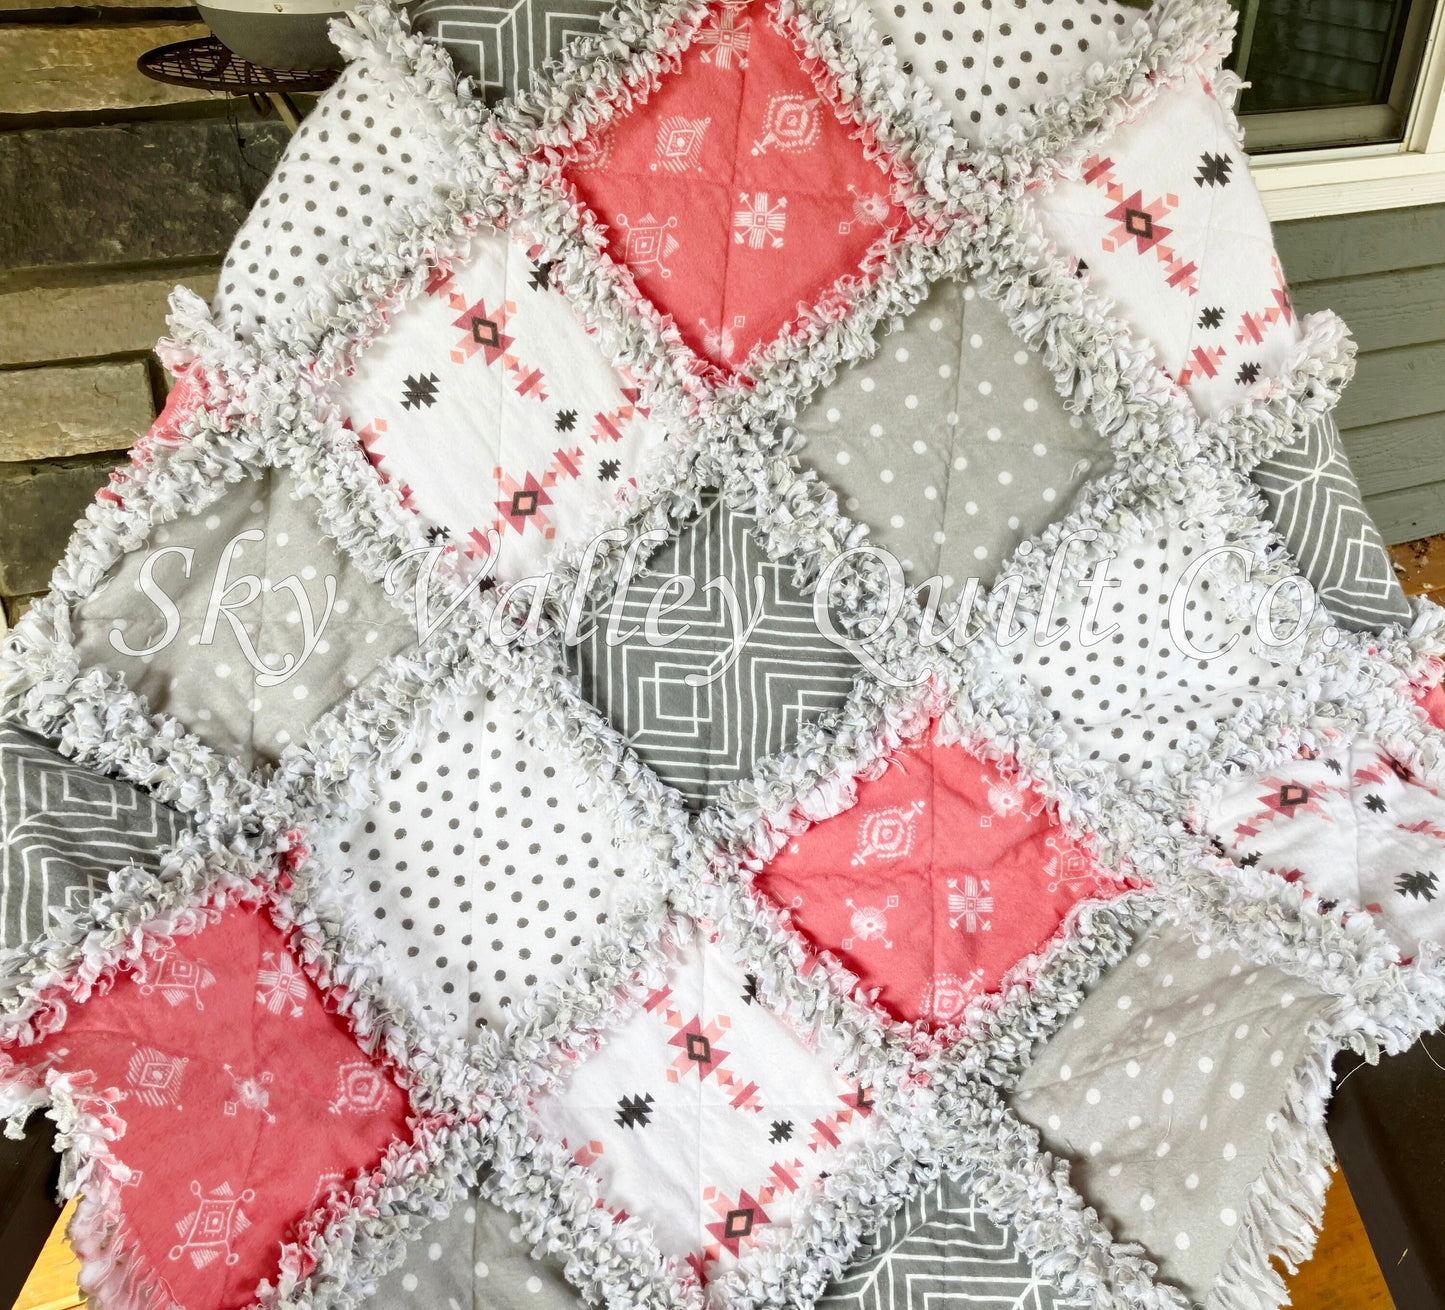 Finished rag quilt - Aztec Southwest coral and gray